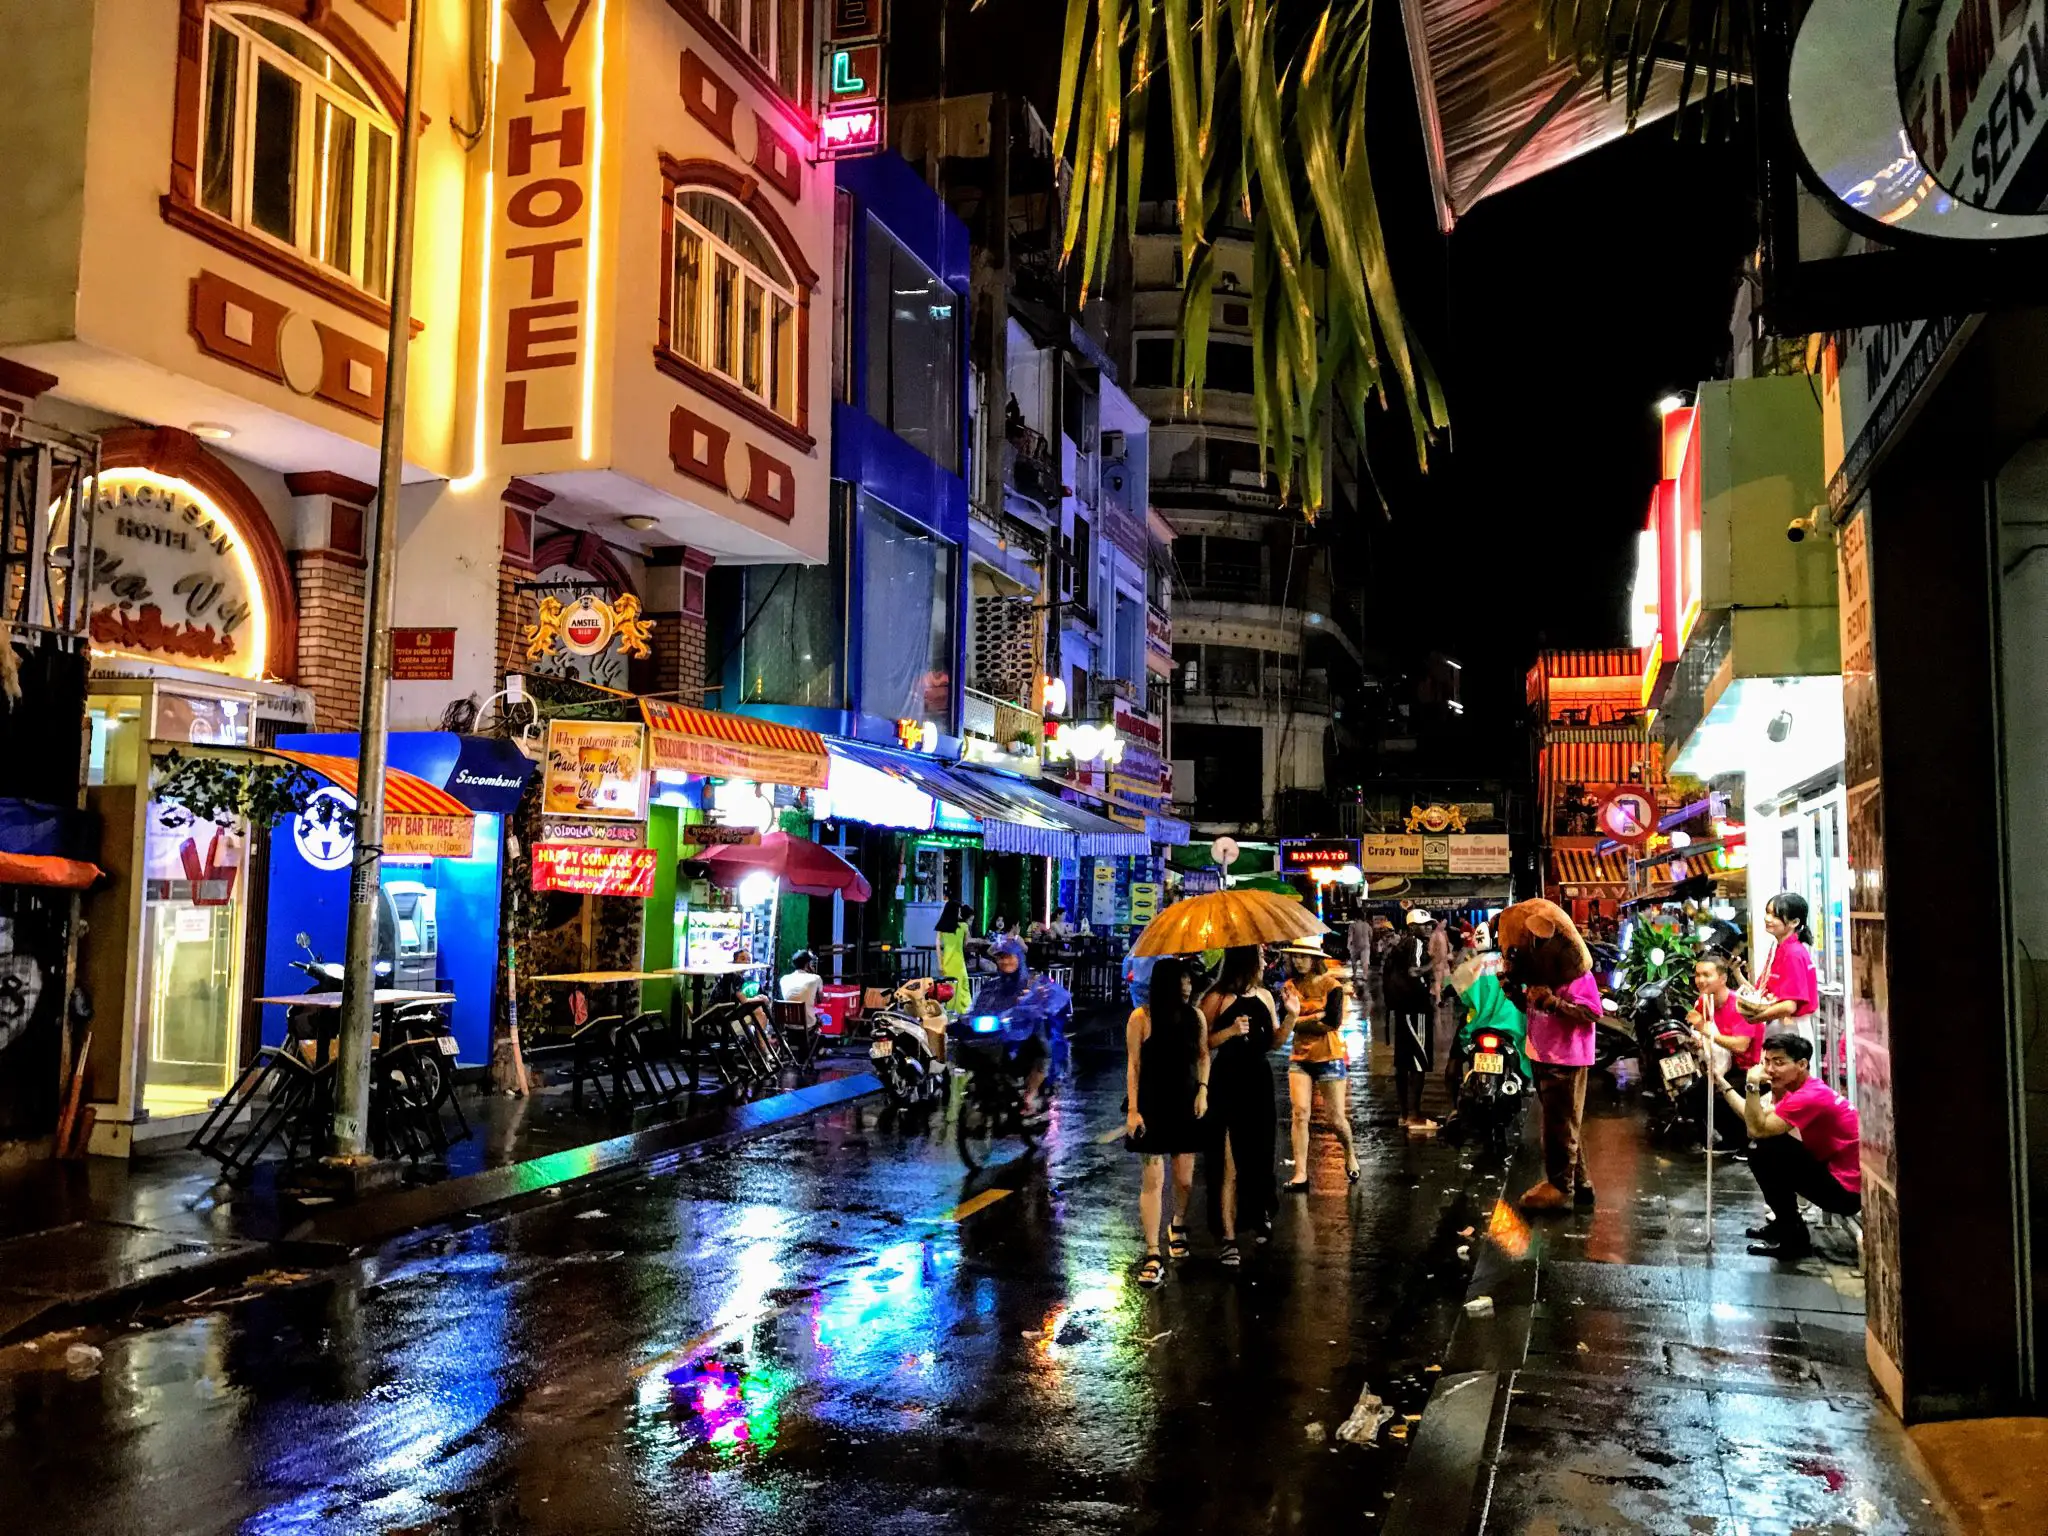 The good, the bad and the ugly about visiting Ho Chi Minh City in Vietnam